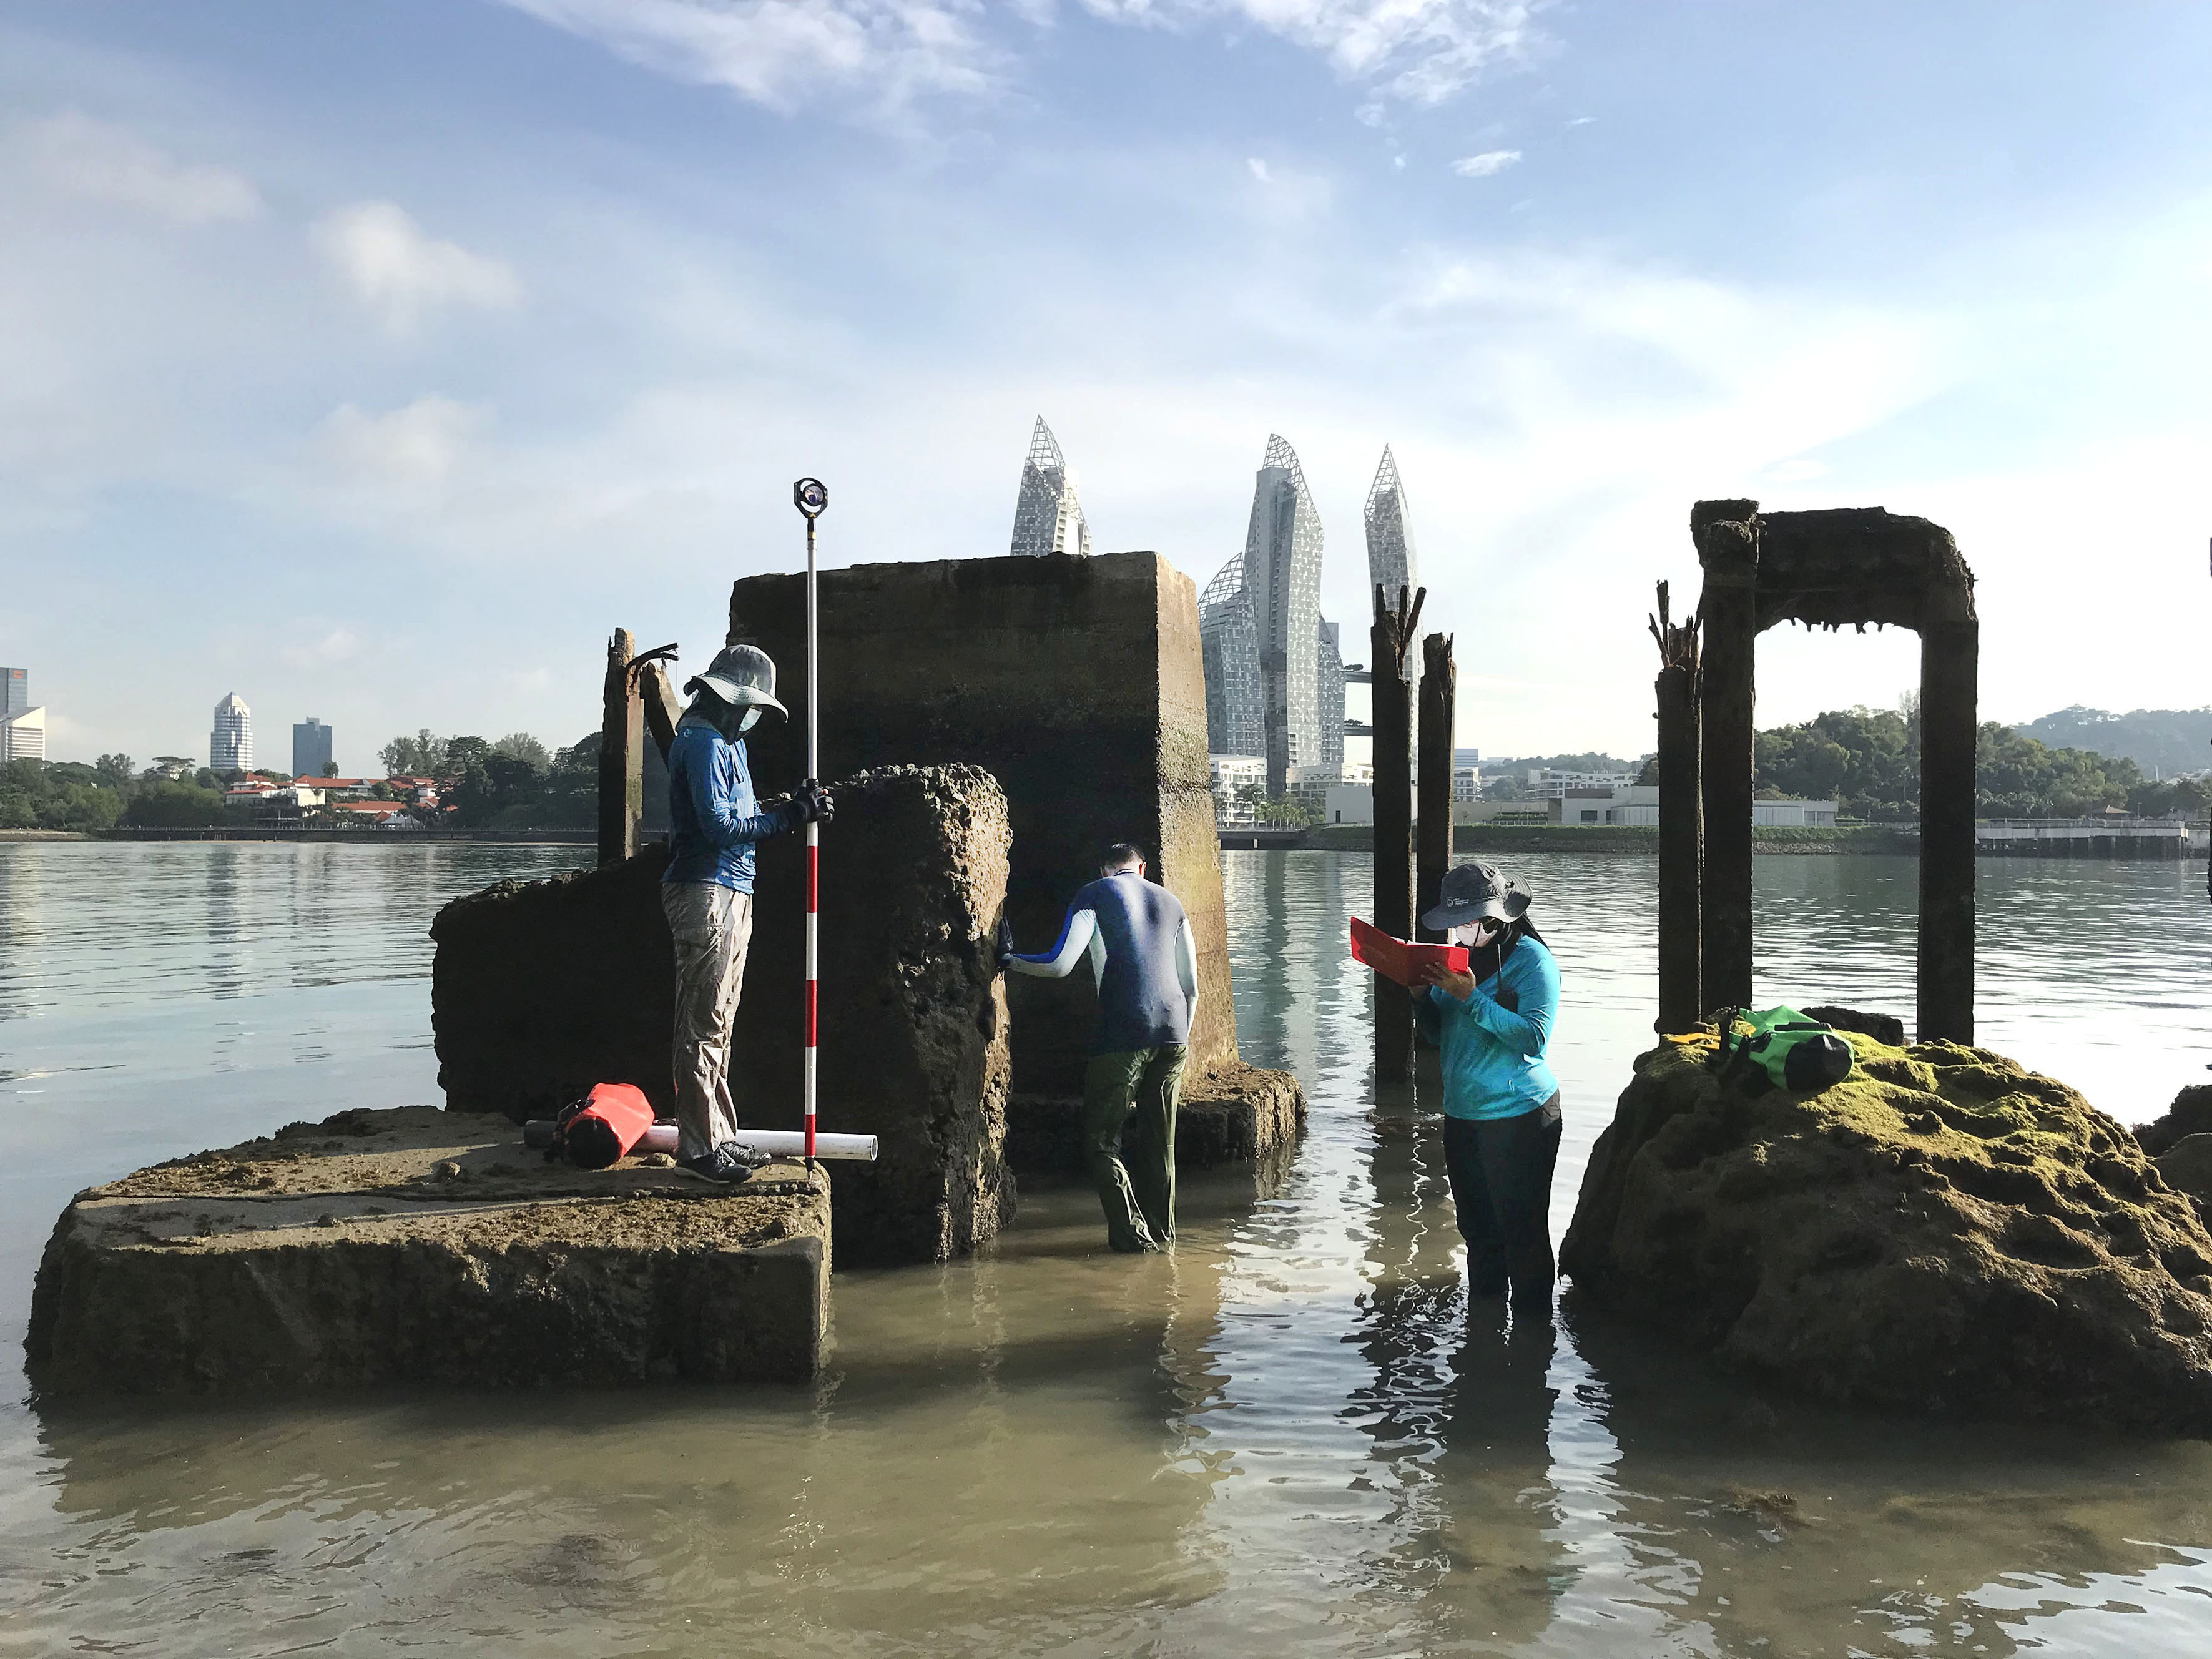 EOS researchers conducting fieldwork on corals, which record sea-level changes, in Sentosa, Singapore (Source: Aron Meltzner)